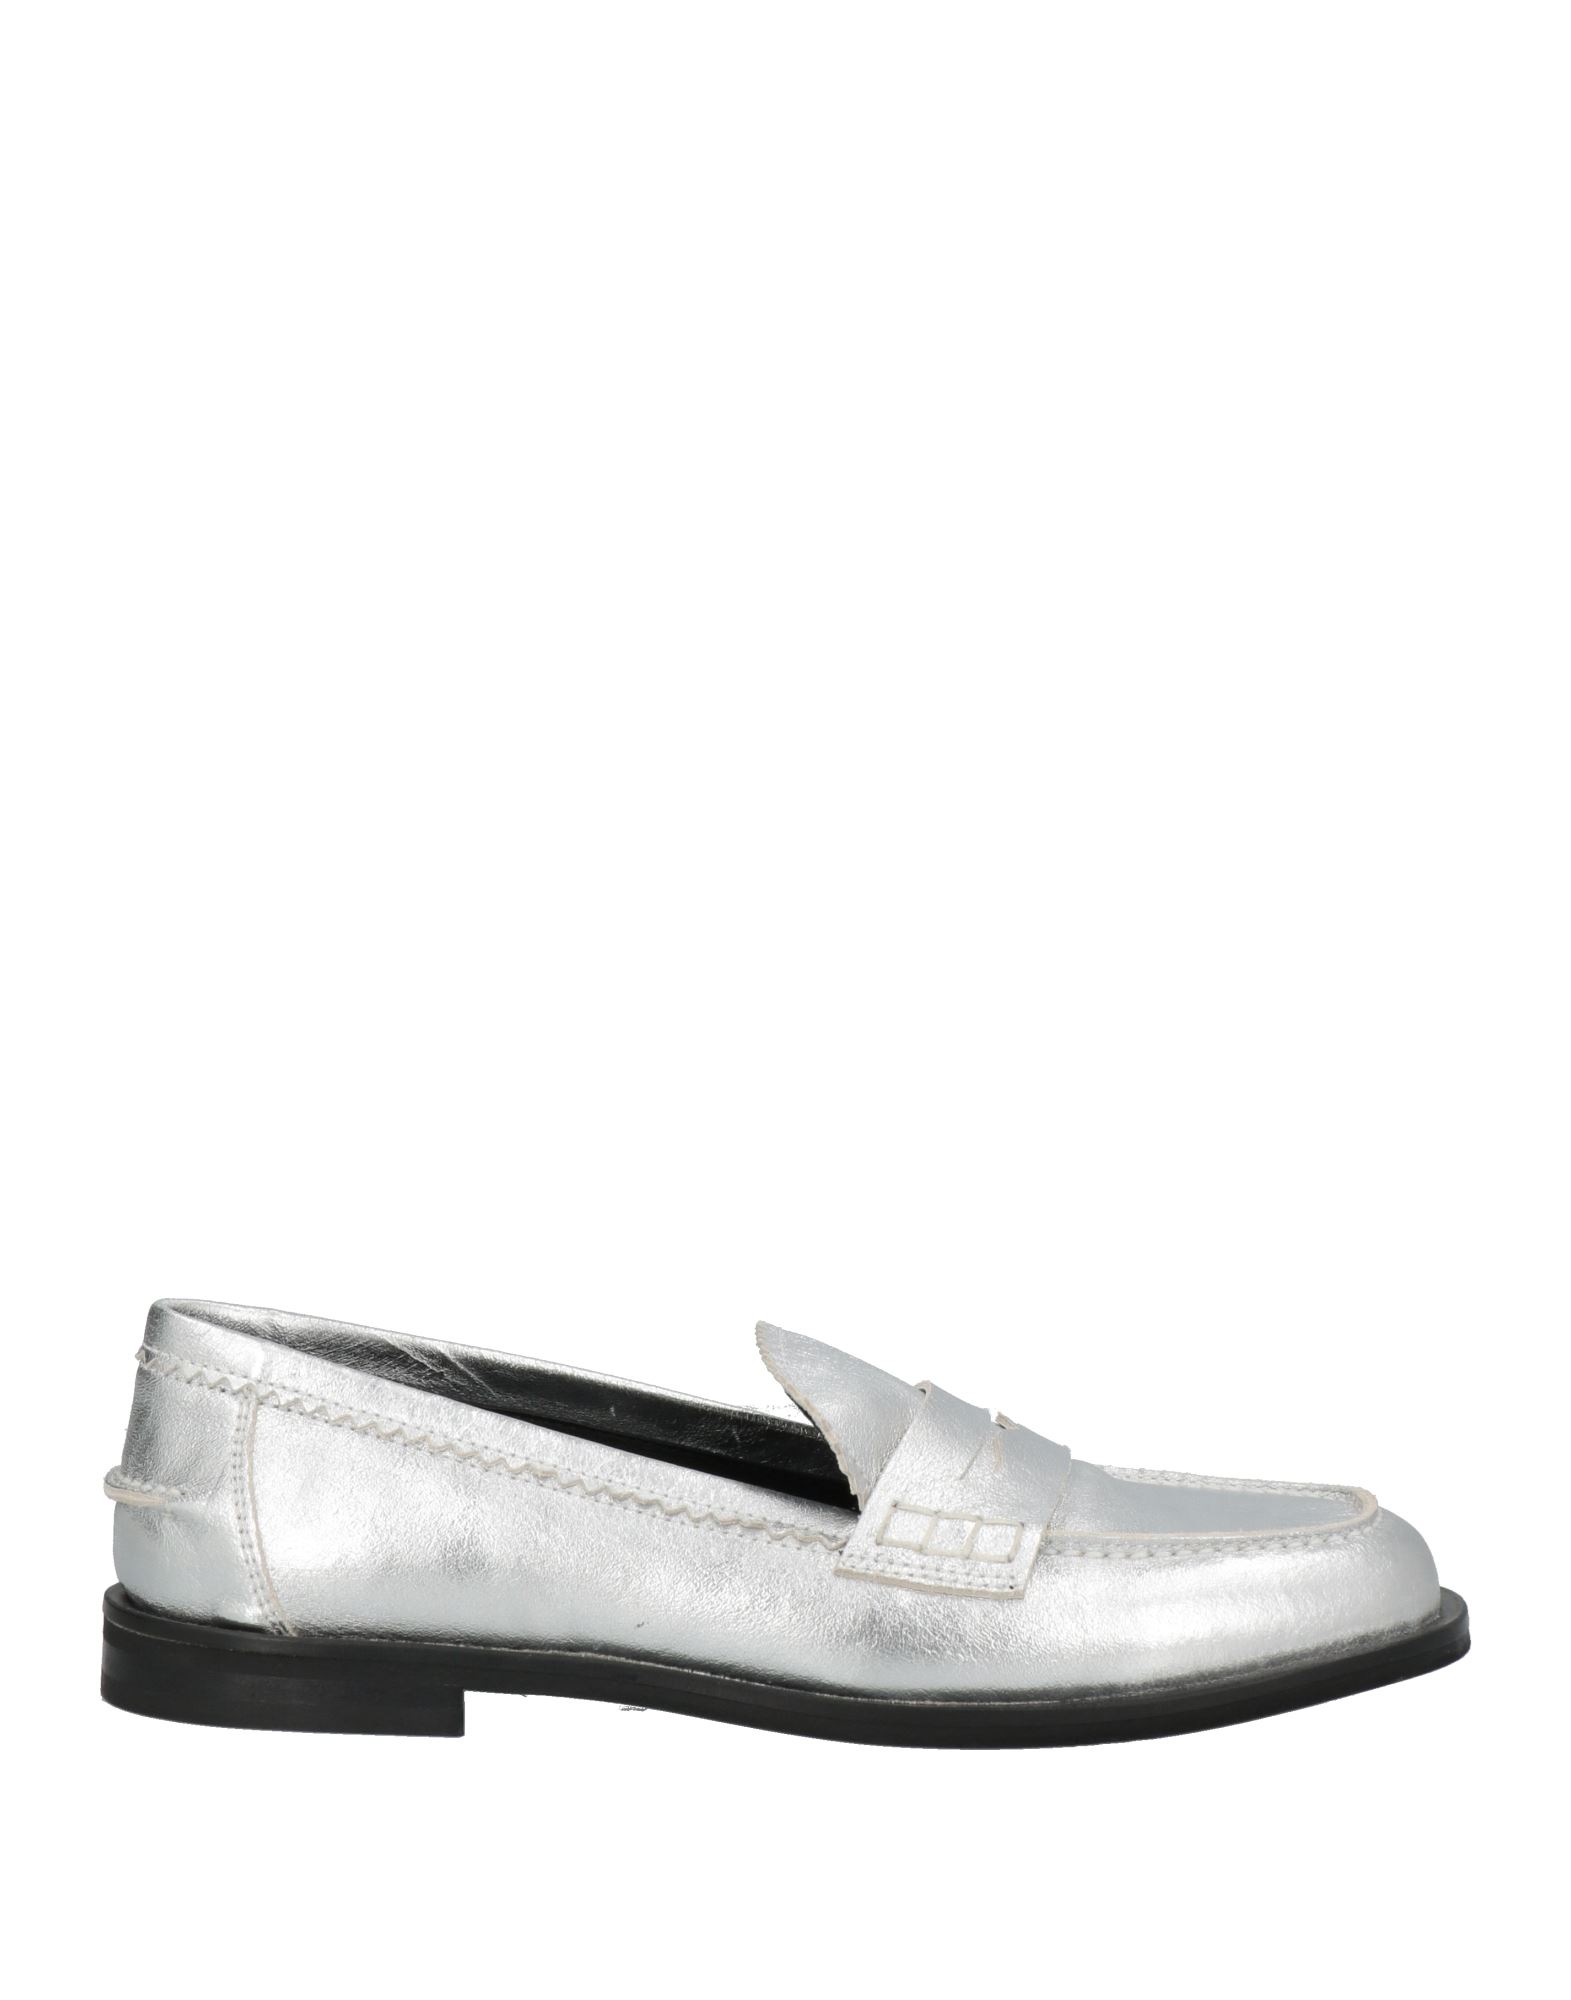 Janet & Janet Woman Loafers Silver Size 6 Soft Leather